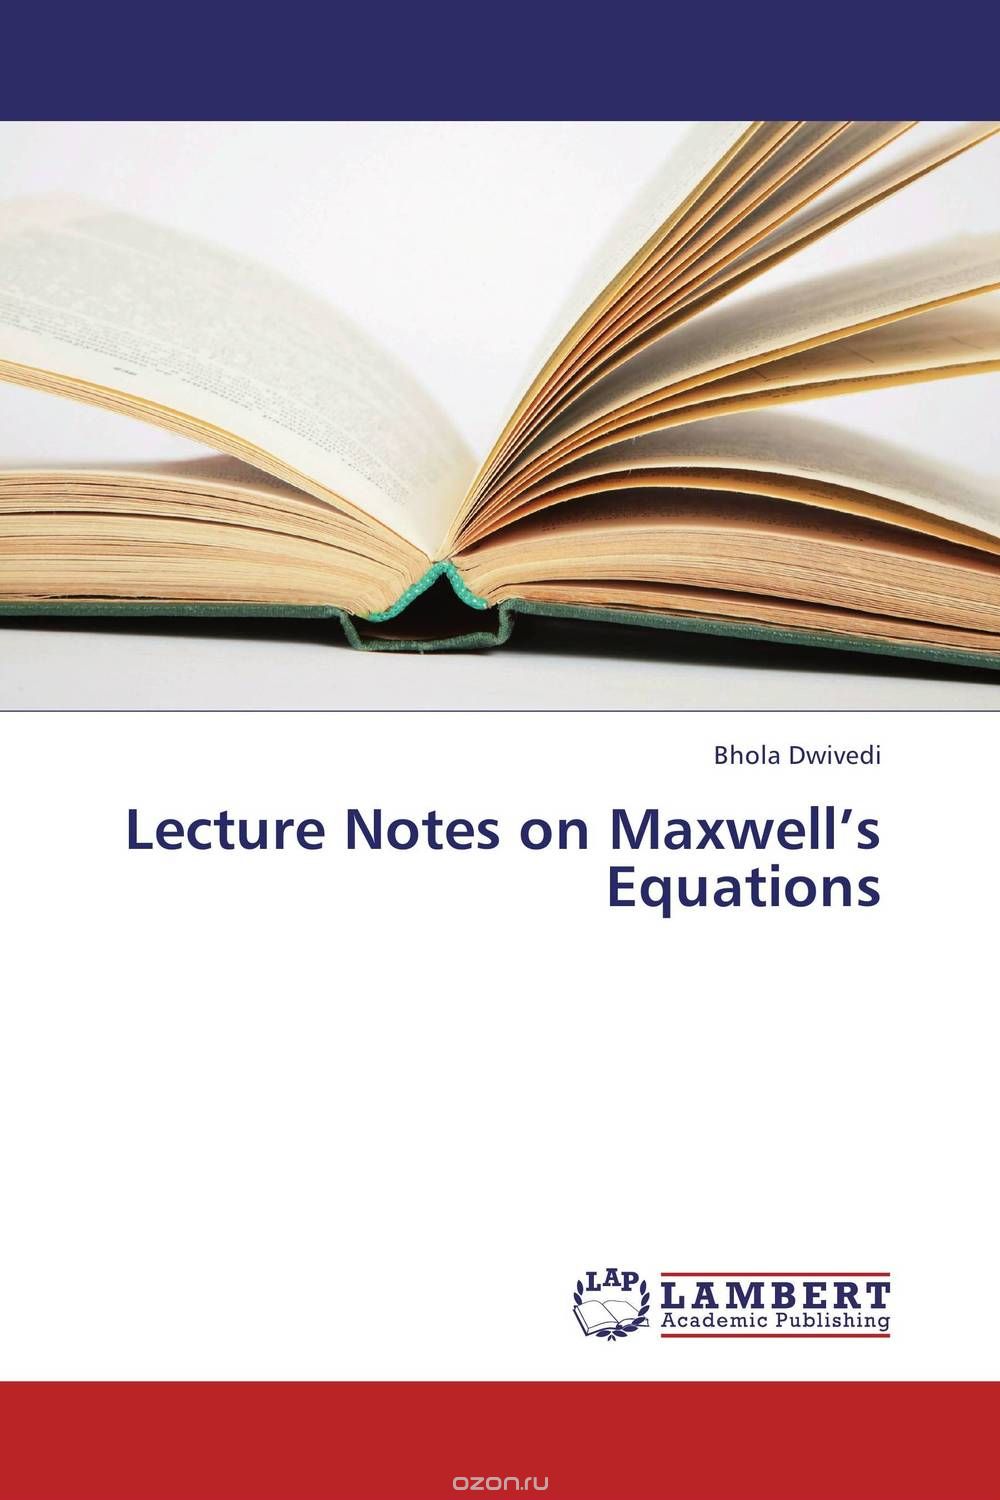 Скачать книгу "Lecture Notes on Maxwell’s Equations"